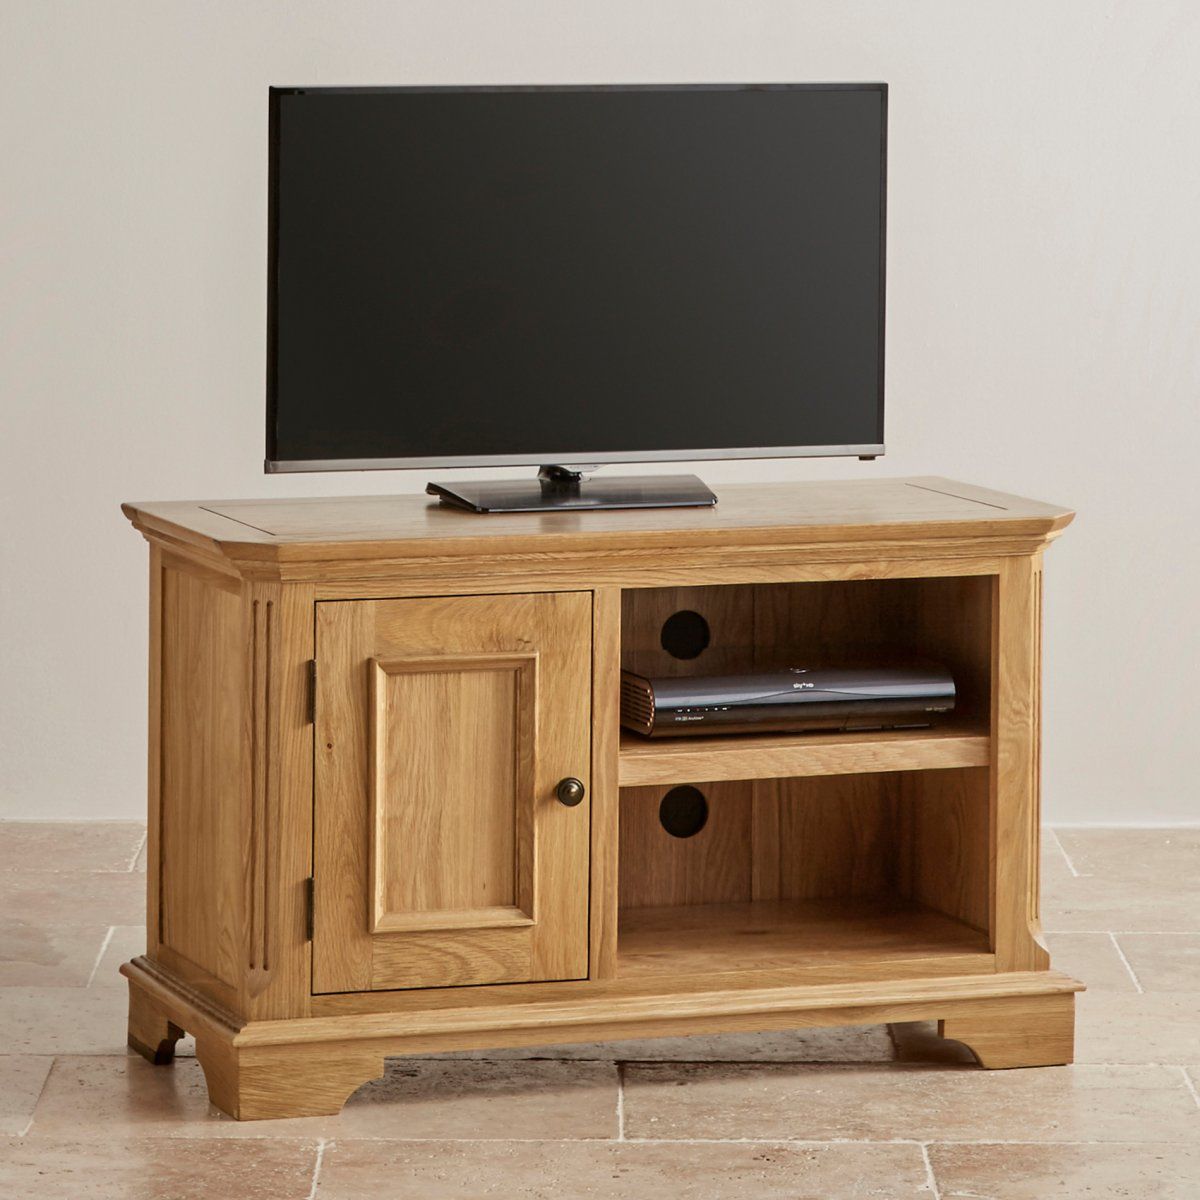 Edinburgh Small Tv Cabinet In Solid Oak | Oak Furniture Land Throughout Tv Stands And Cabinets (View 4 of 15)